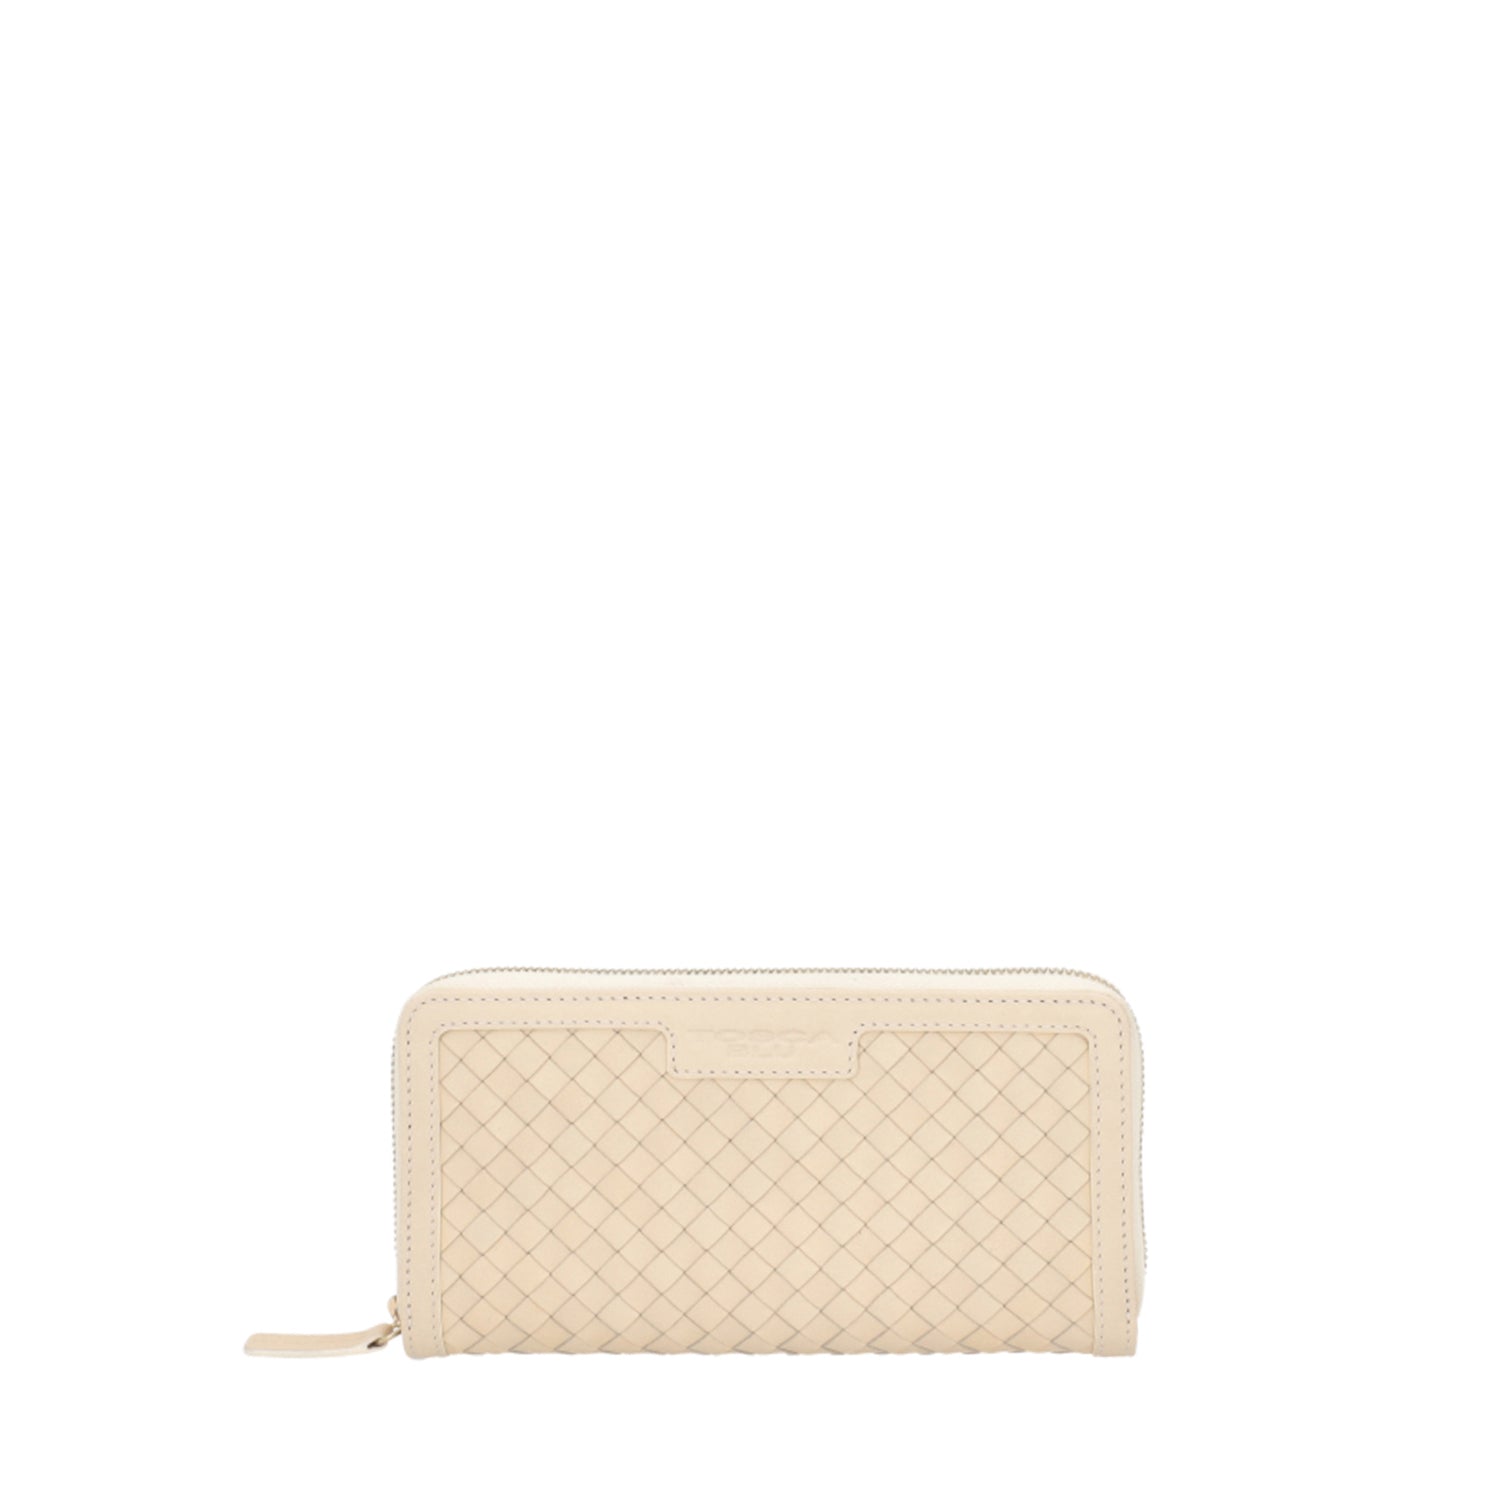 NATURAL FRESIA LARGE WOVEN WALLET